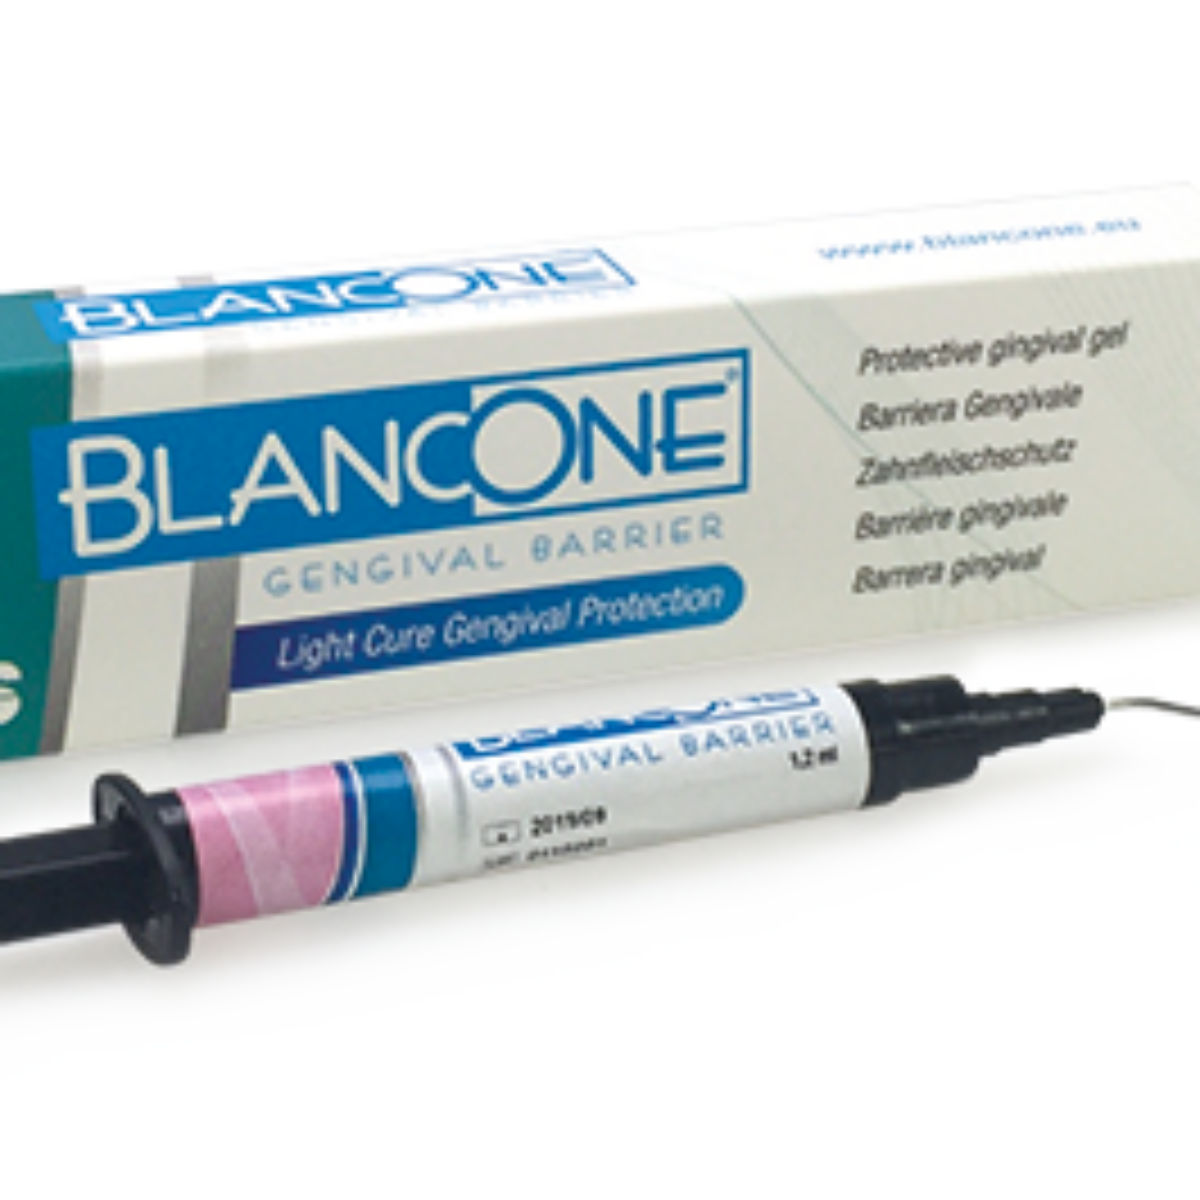 BLANCONE GINGIVAL BARRIER+